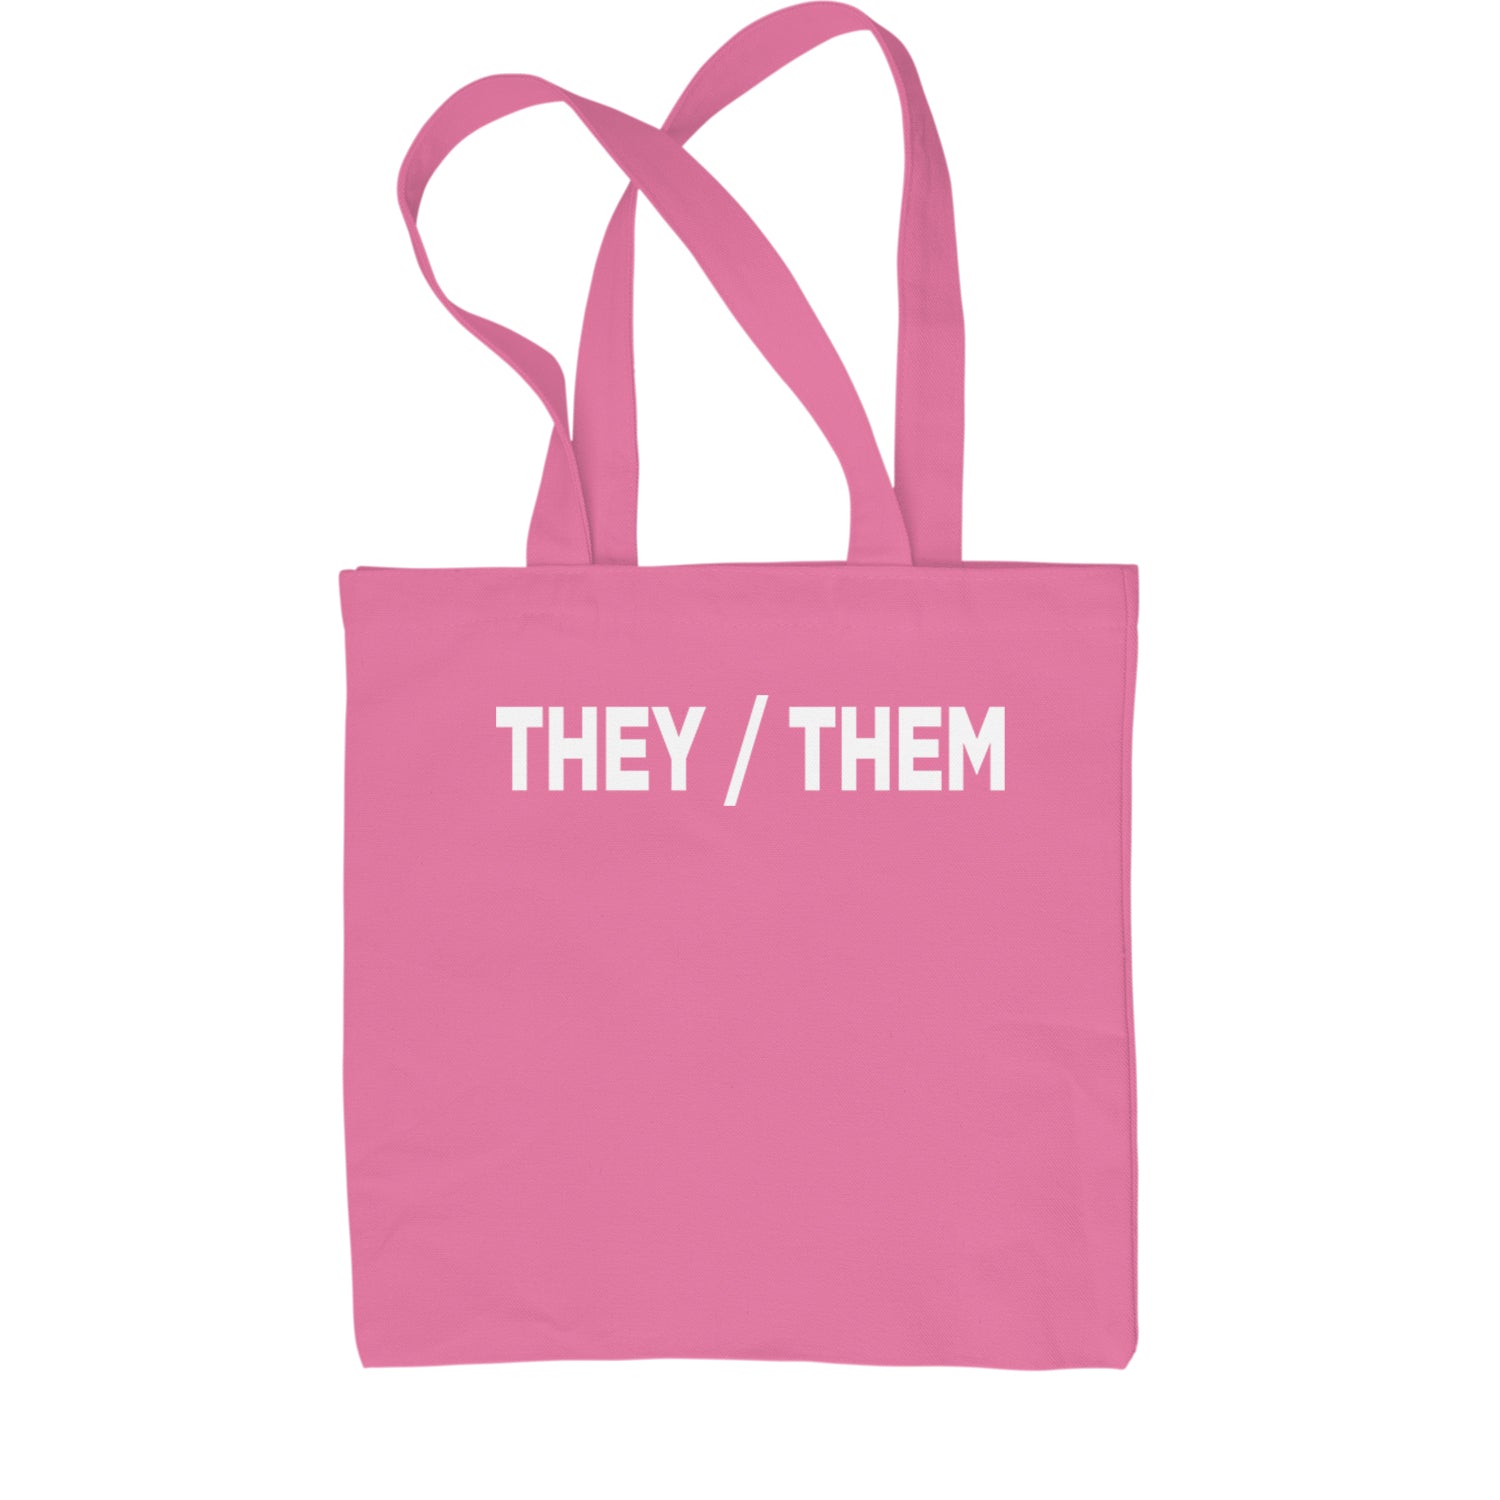 They Them Gender Pronouns Diversity and Inclusion Shopping Tote Bag binary, civil, gay, he, her, him, nonbinary, pride, rights, she, them, they by Expression Tees